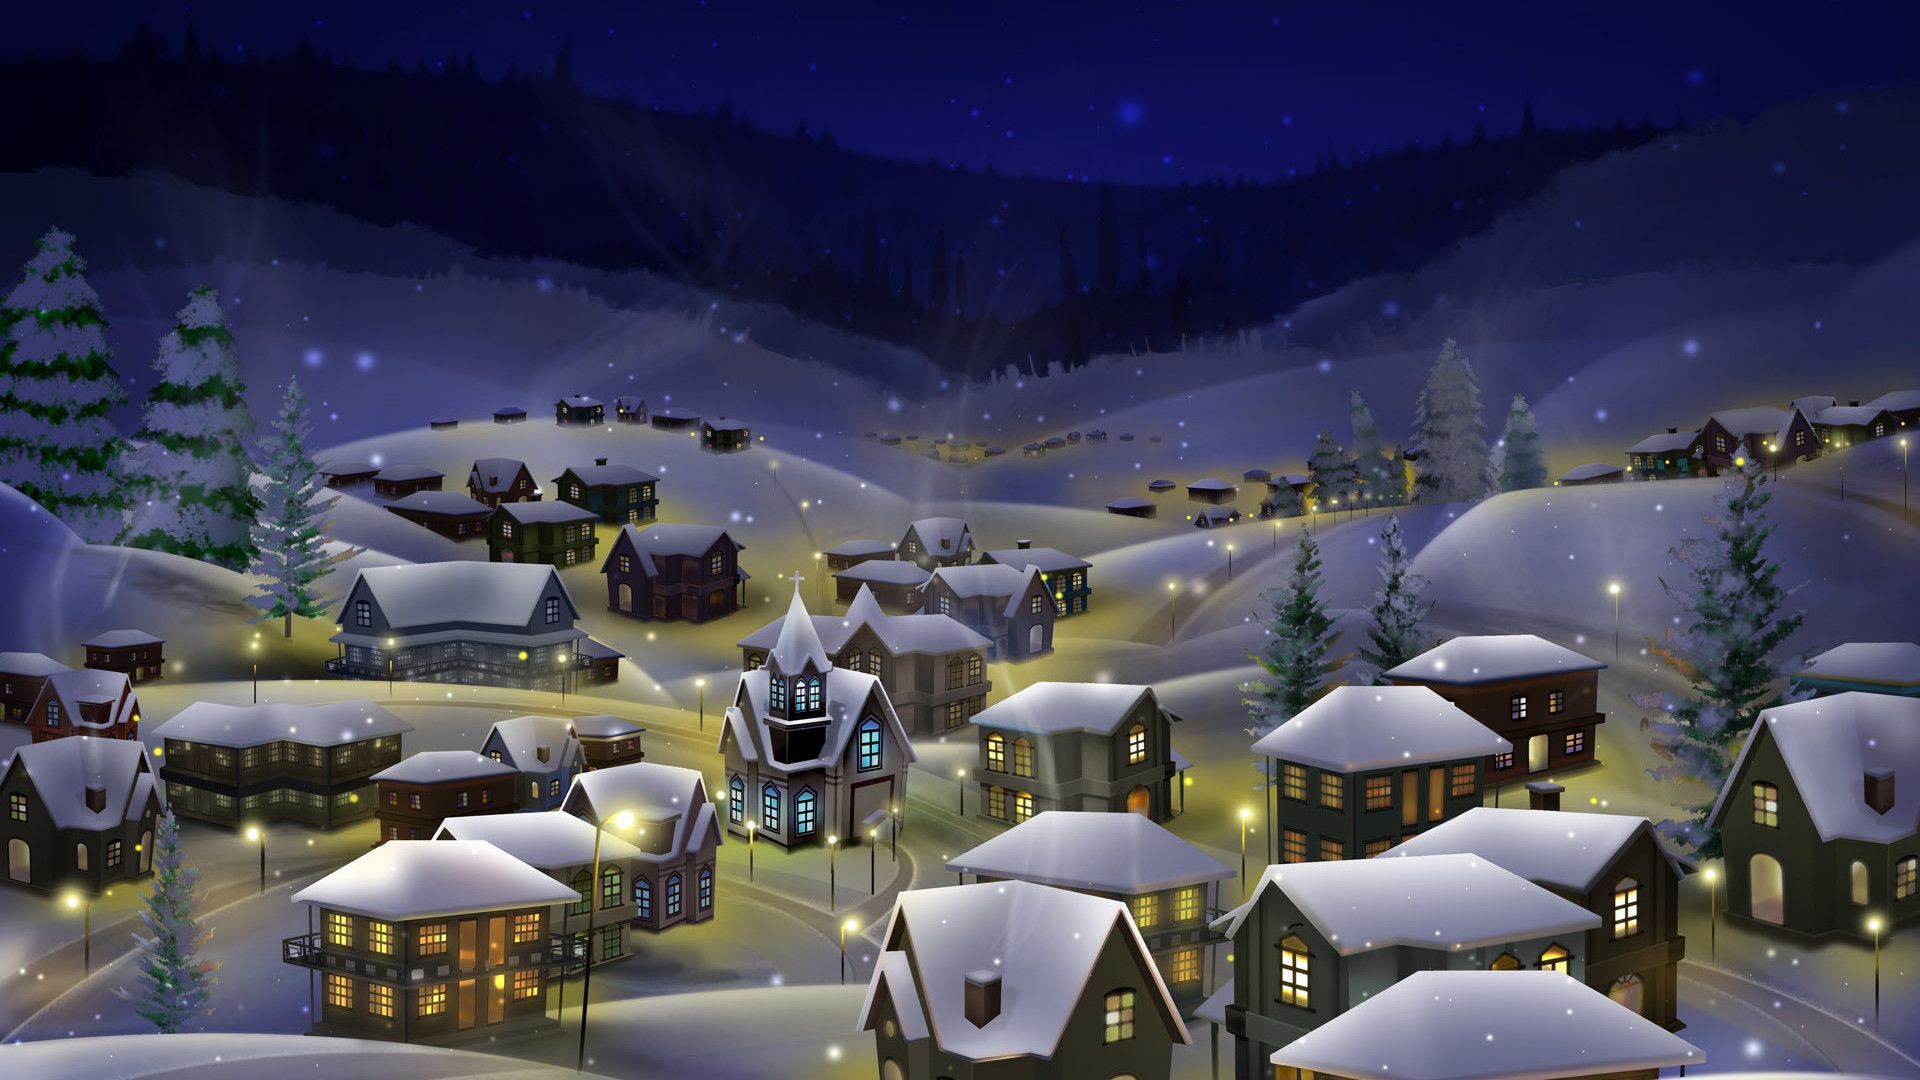 Wallpaper Download 1920x1080 Winter drawing covered with snow in the night. D. Christmas village display, Christmas wallpaper hd, Merry christmas wallpaper